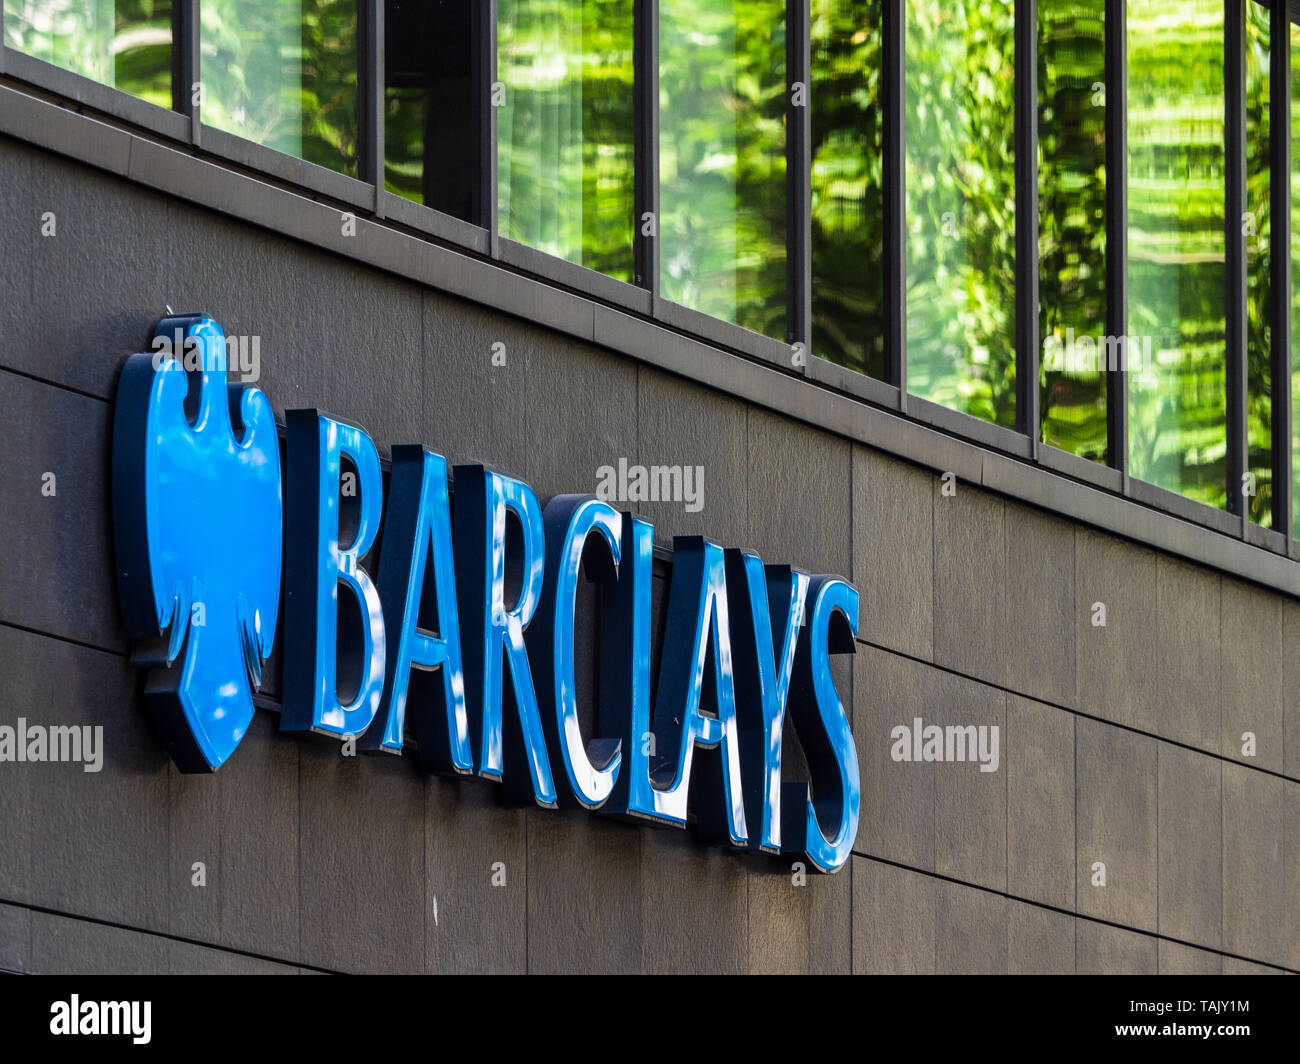 Barclays Bank Branch sign - Sign outside the Barclays Bank London Branch at 25 Charing Cross Road Stock Photo